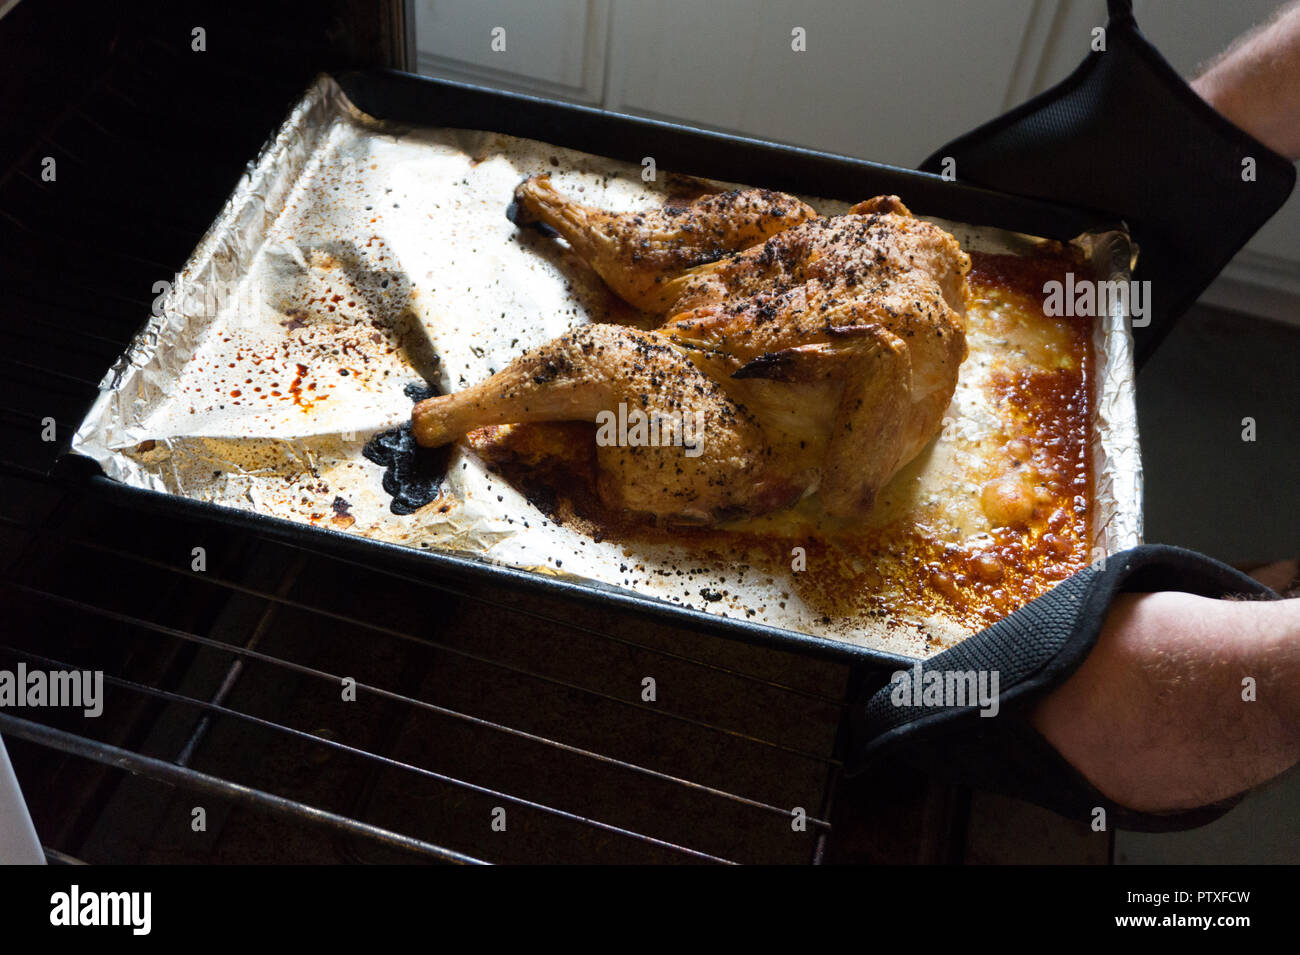 https://c8.alamy.com/comp/PTXFCW/perfectly-roasted-whole-spatchcocked-chicken-being-taken-out-of-an-antique-oven-cooker-by-mans-hands-delicious!-PTXFCW.jpg